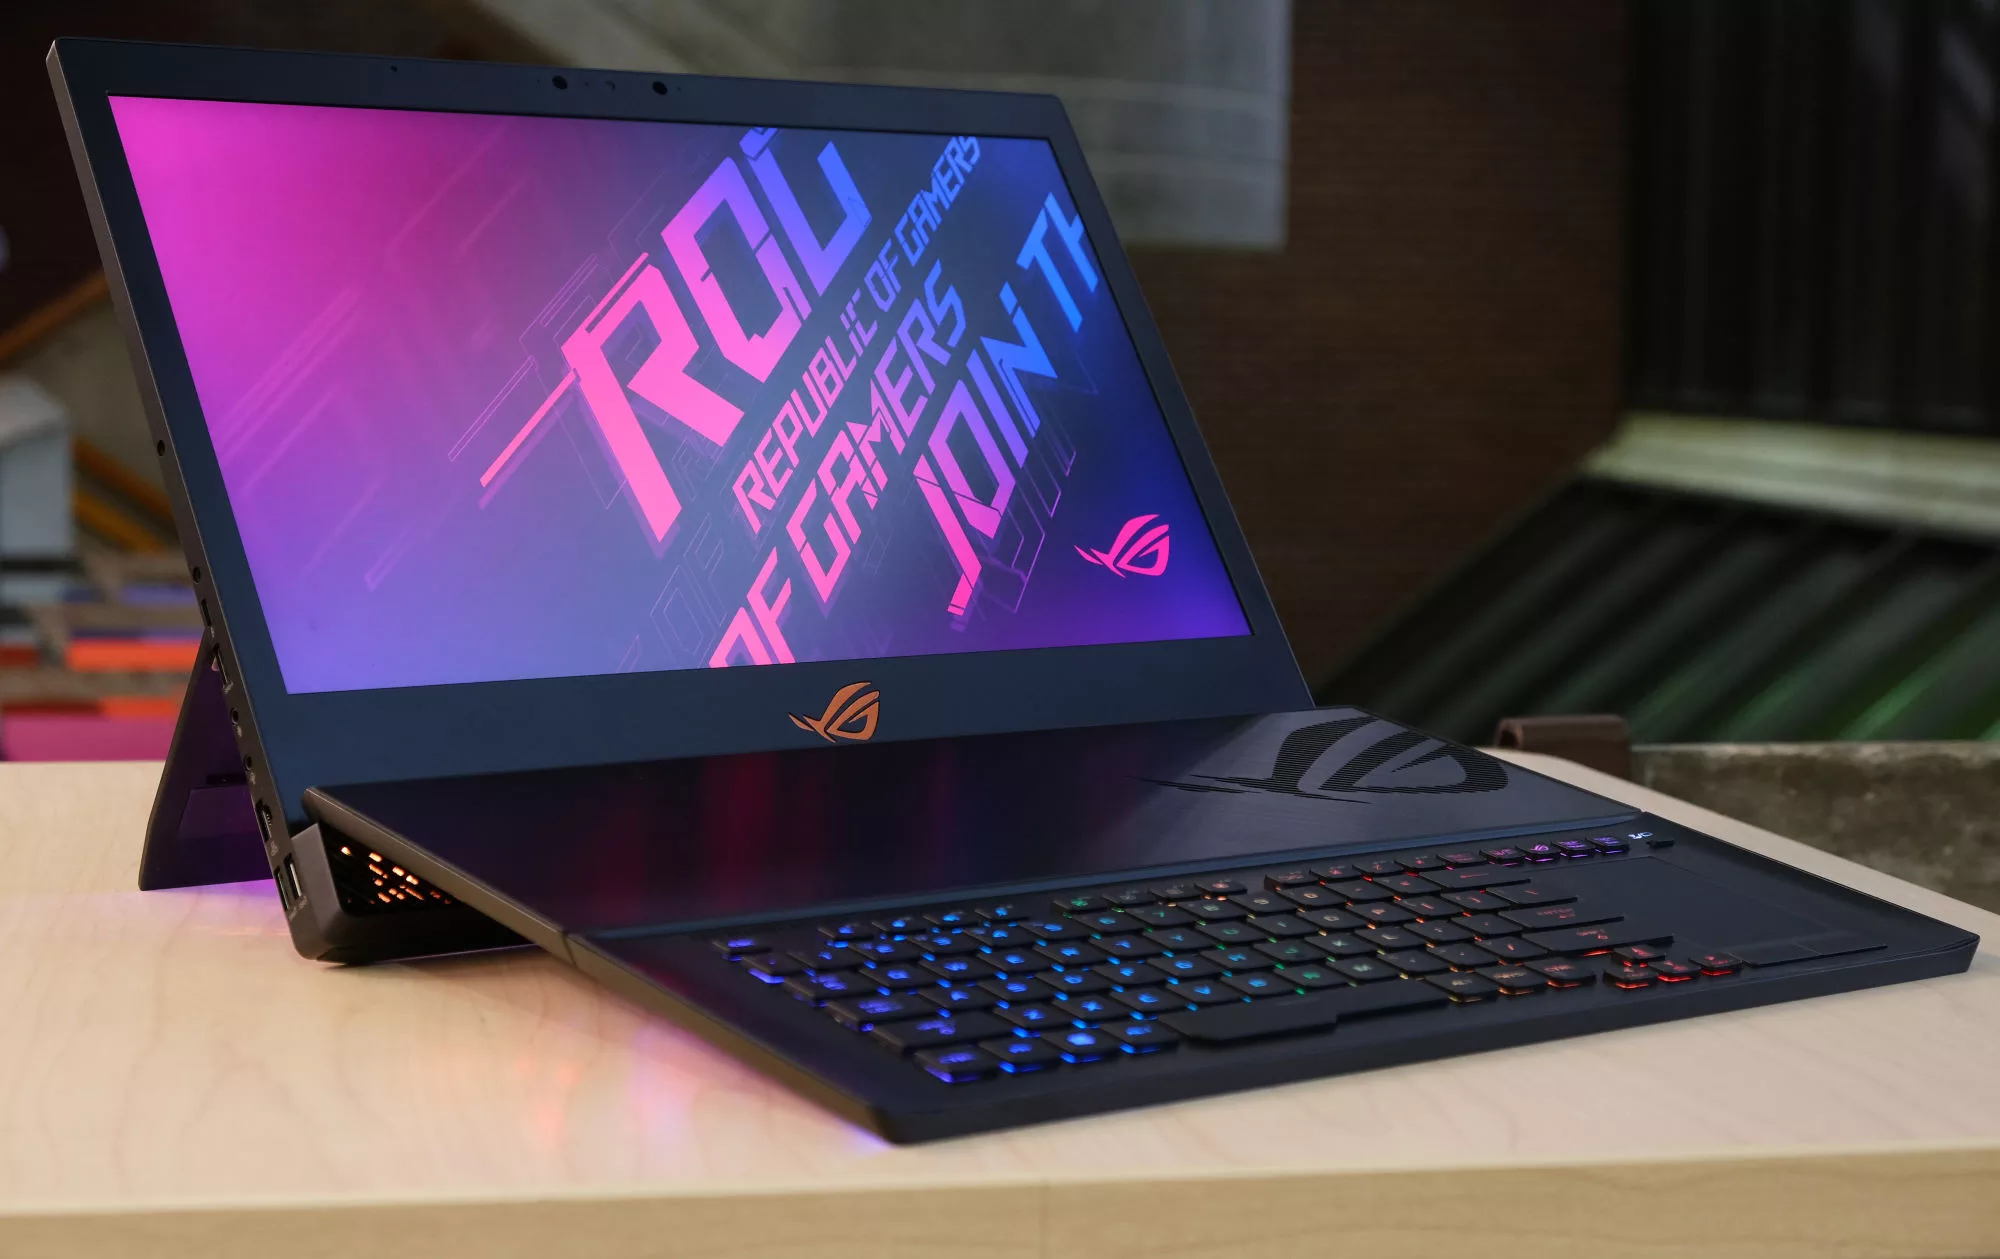 The ROG Mothership's otherworldly fusion of power and portability boosted  my work and play | ROG - Republic of Gamers Česká republika